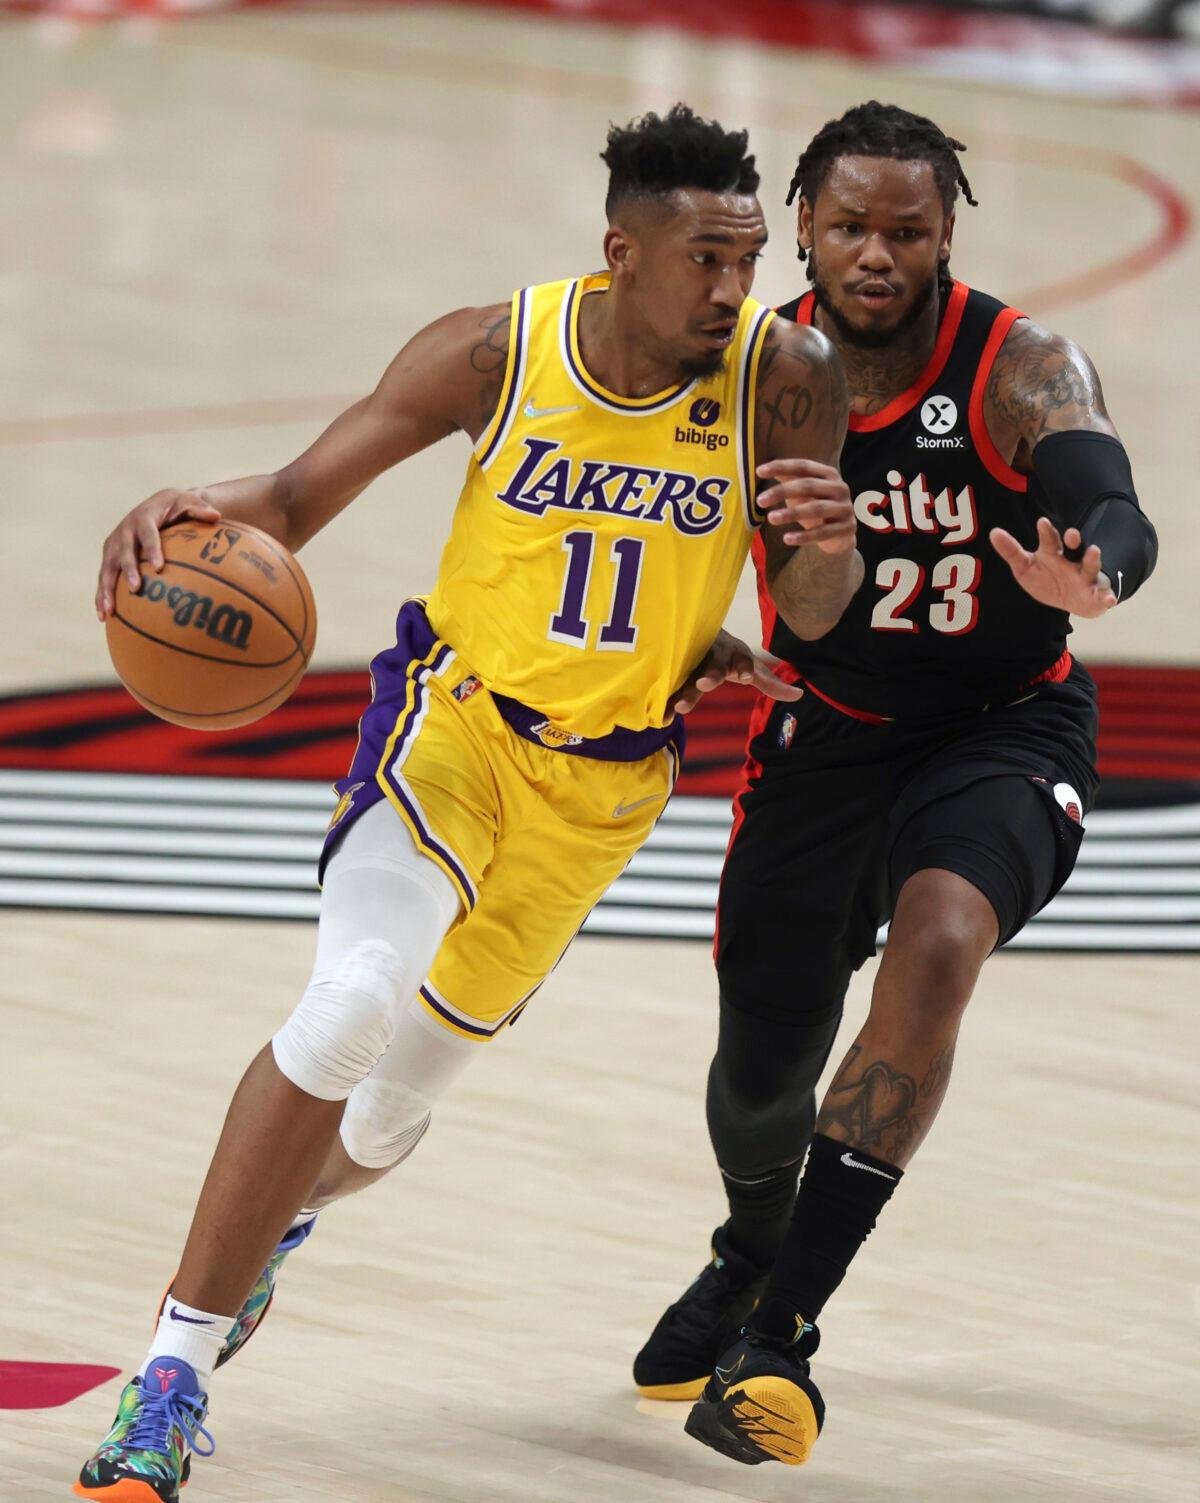 Los Angeles Lakers guard Malik Monk (L) drives as Portland Trail Blazers guard Ben McLemore defends during the first half of an NBA basketball game in Portland, Ore., on Feb. 9, 2022. (Steve Dipaola/AP Photo)